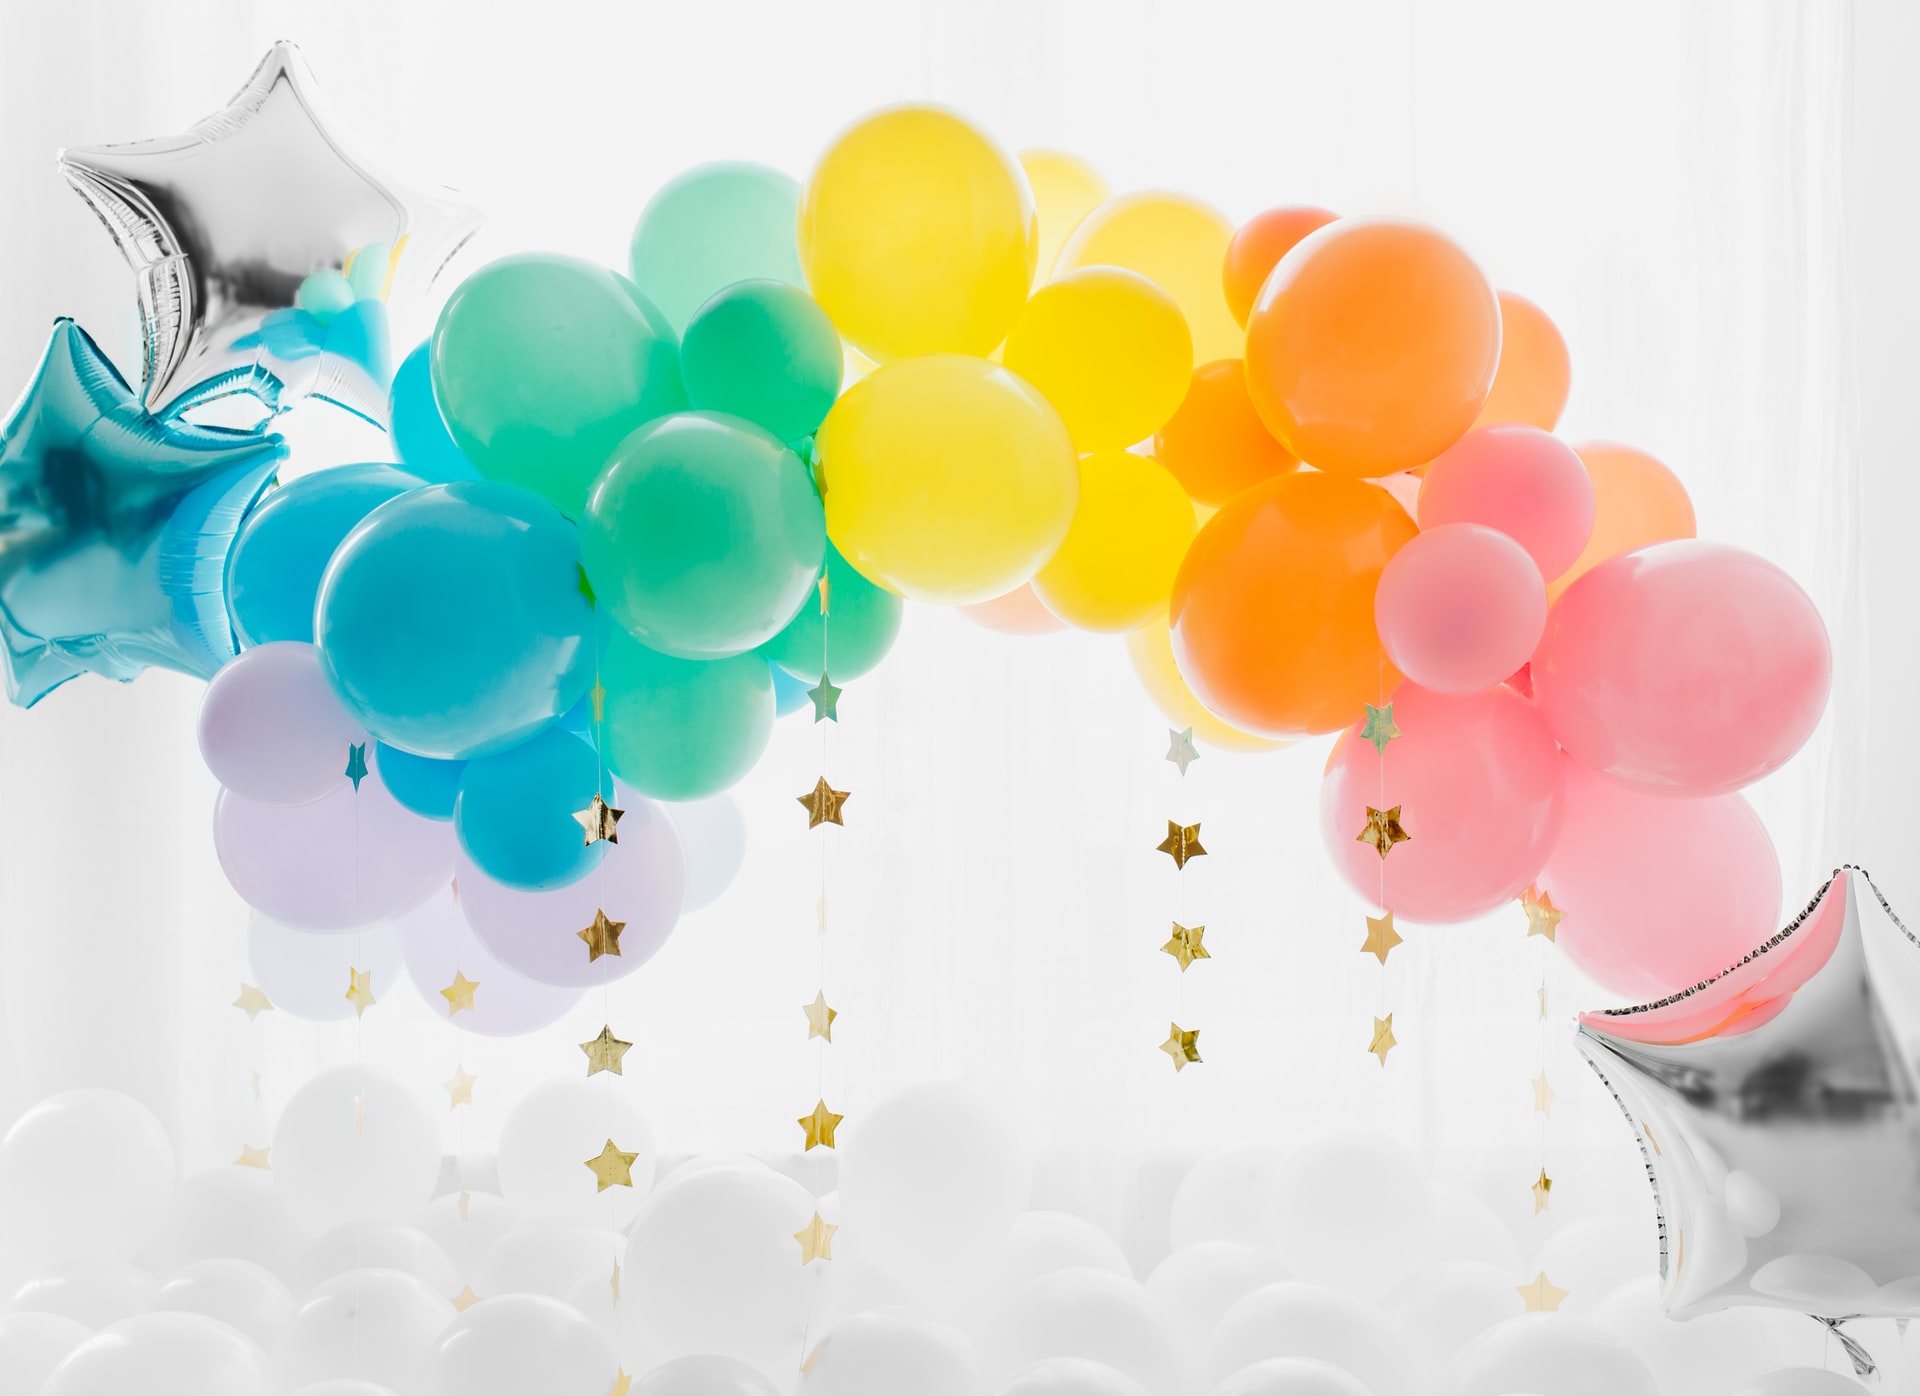 How Balloons and Strings Can Give Your Story Strength - Learn How